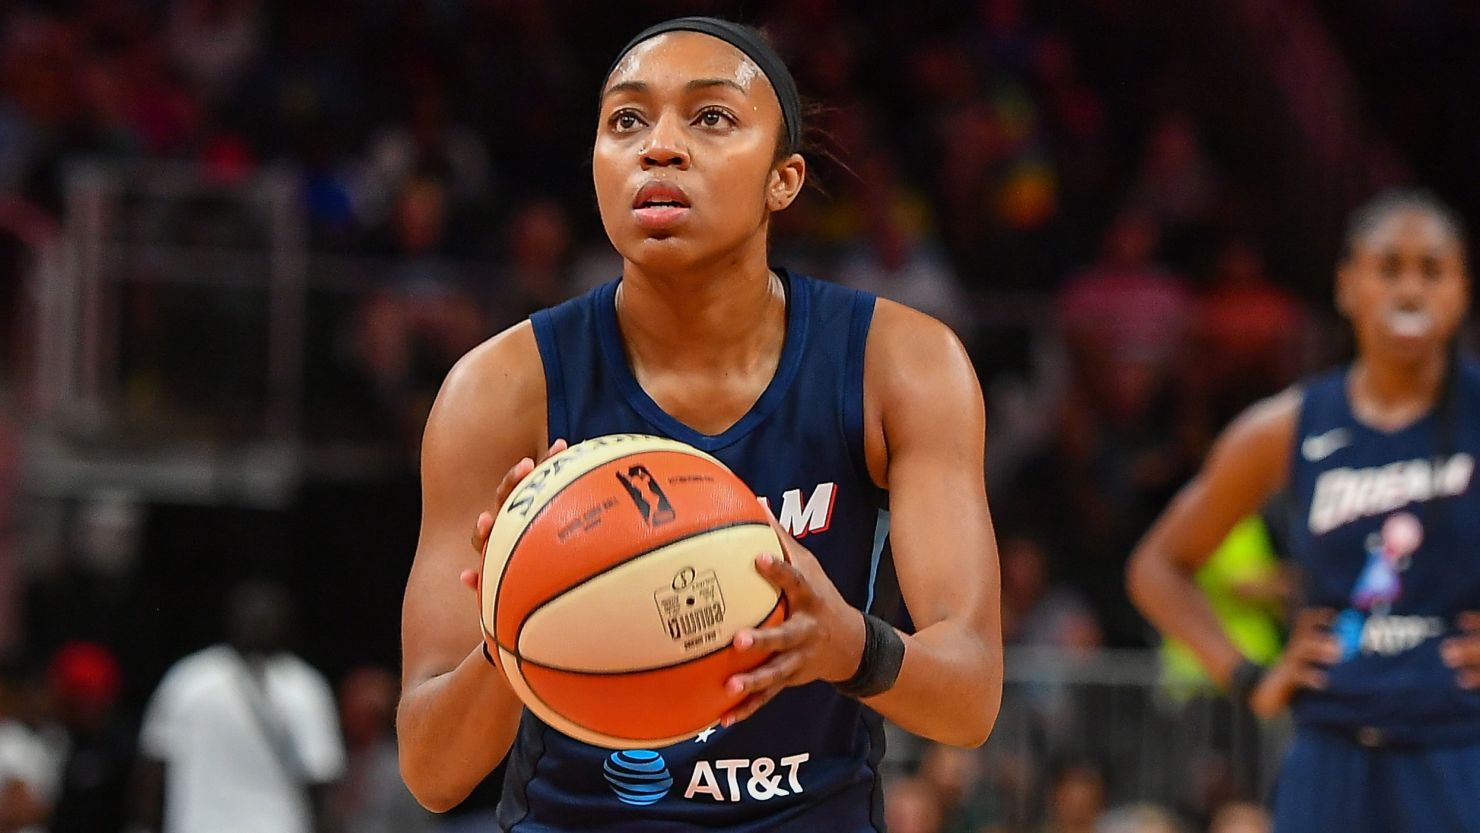 Former WNBA player Renee Montgomery shoots a free throw during a game between the Los Angeles Sparks and the Atlanta Dream, on July 23, 2019.